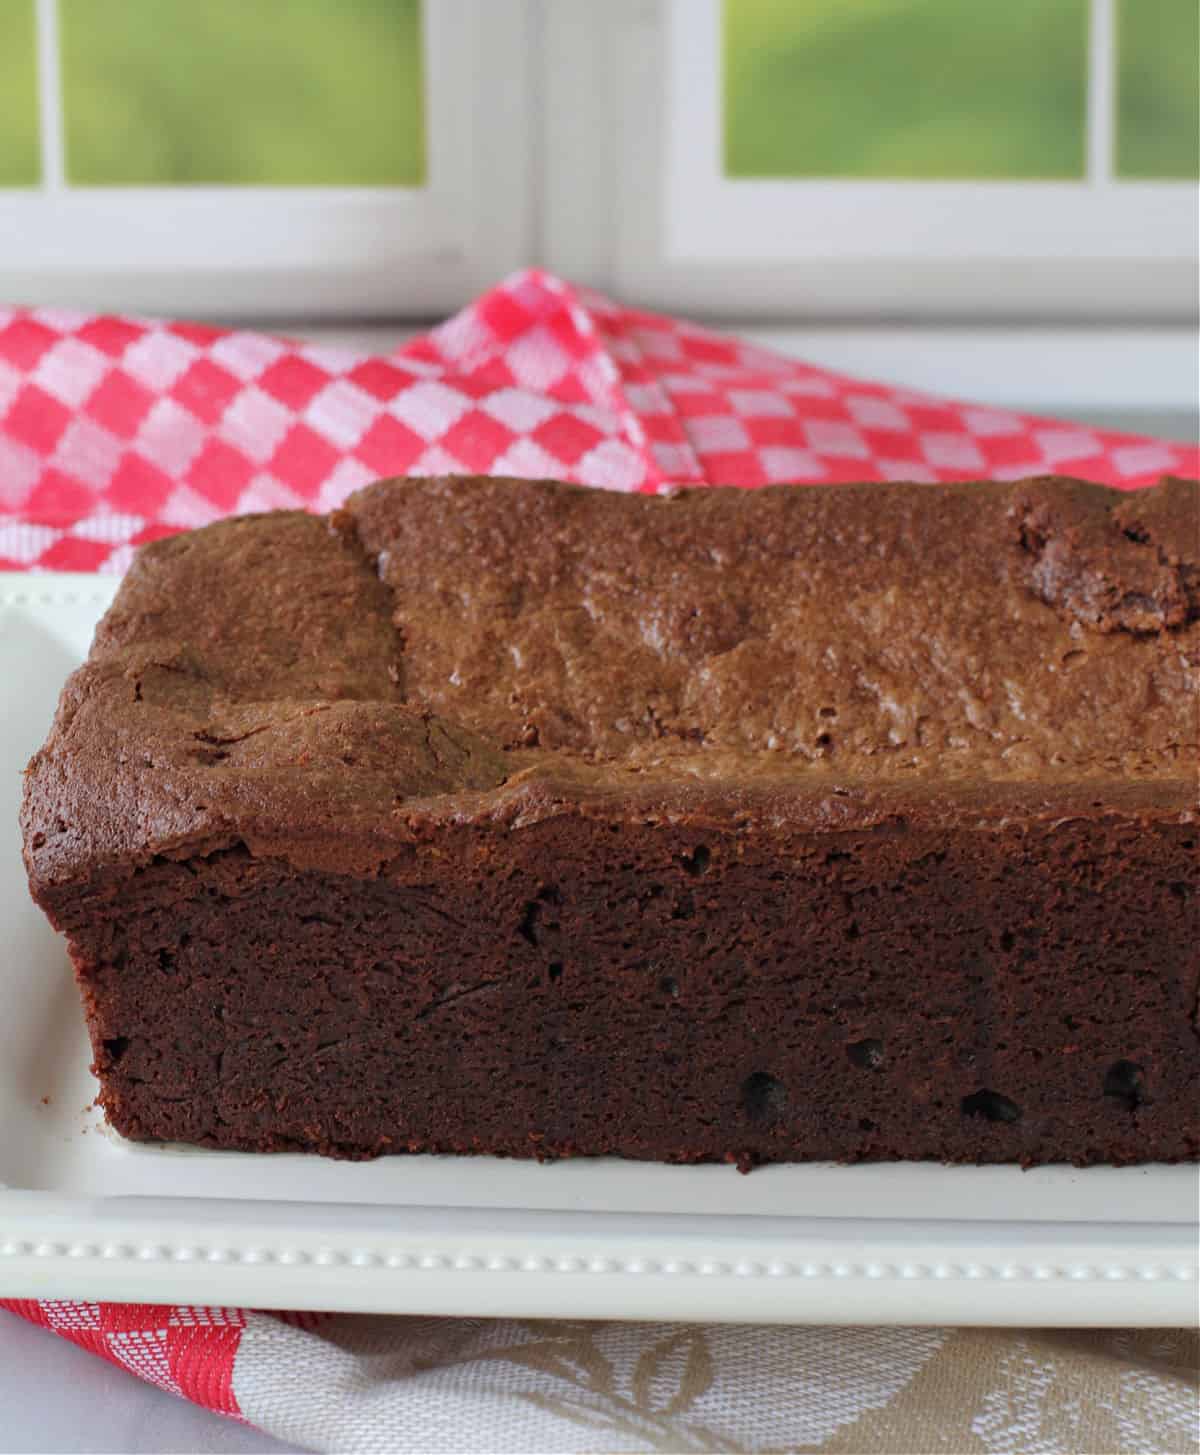 Half-baked chocolate cake loaf on a white platter.